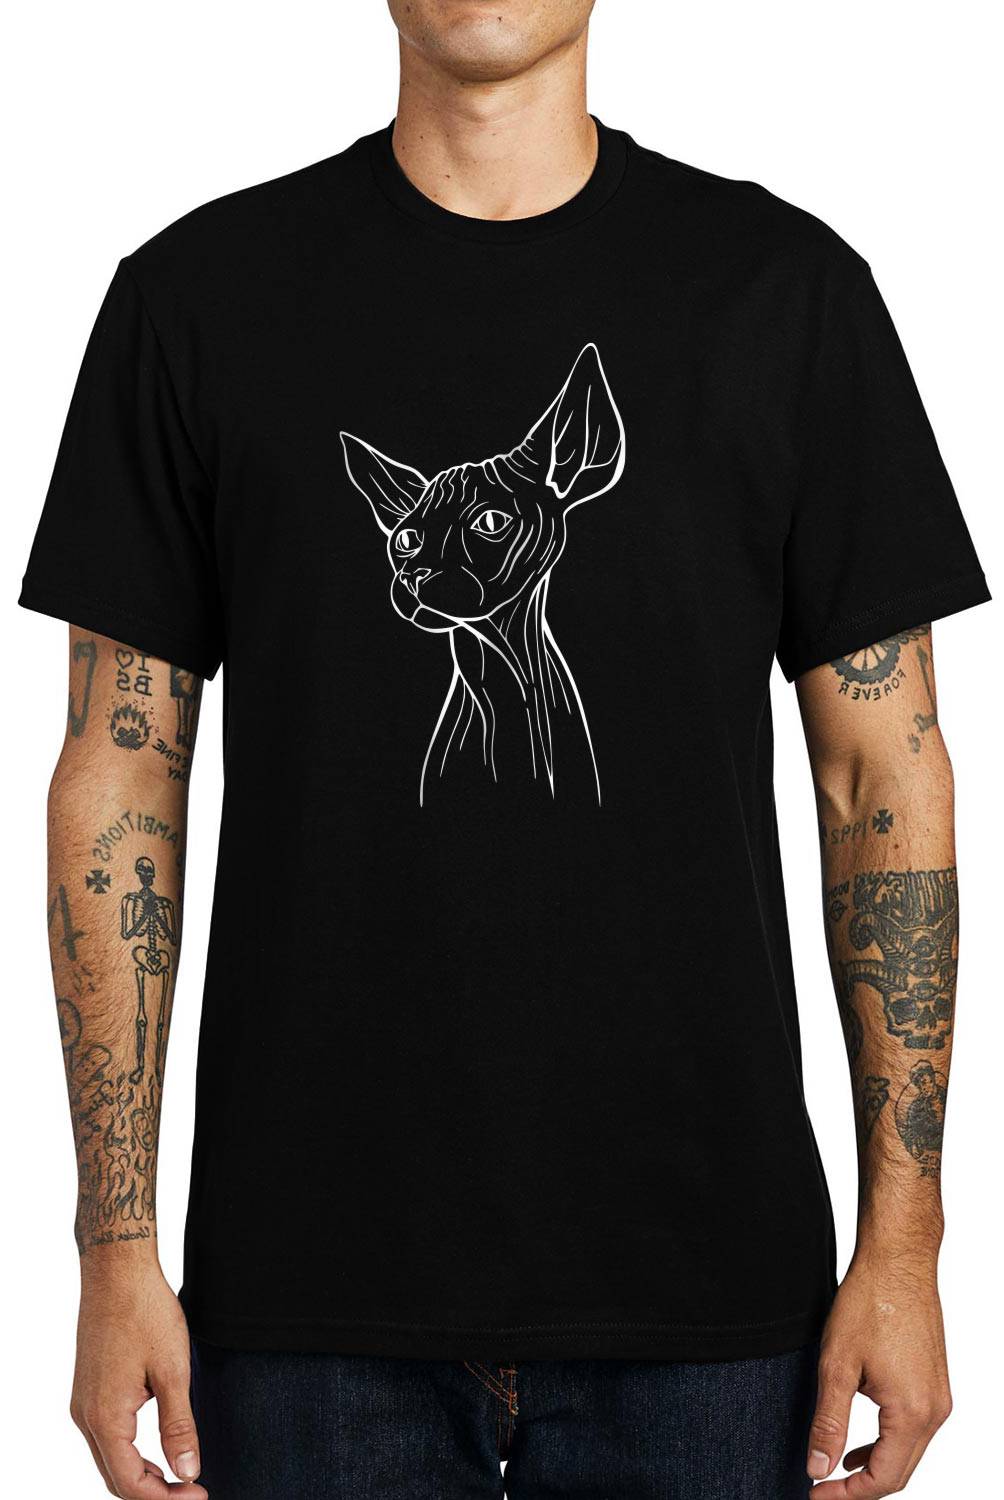 GET OUT - Polera Sphynx Cat